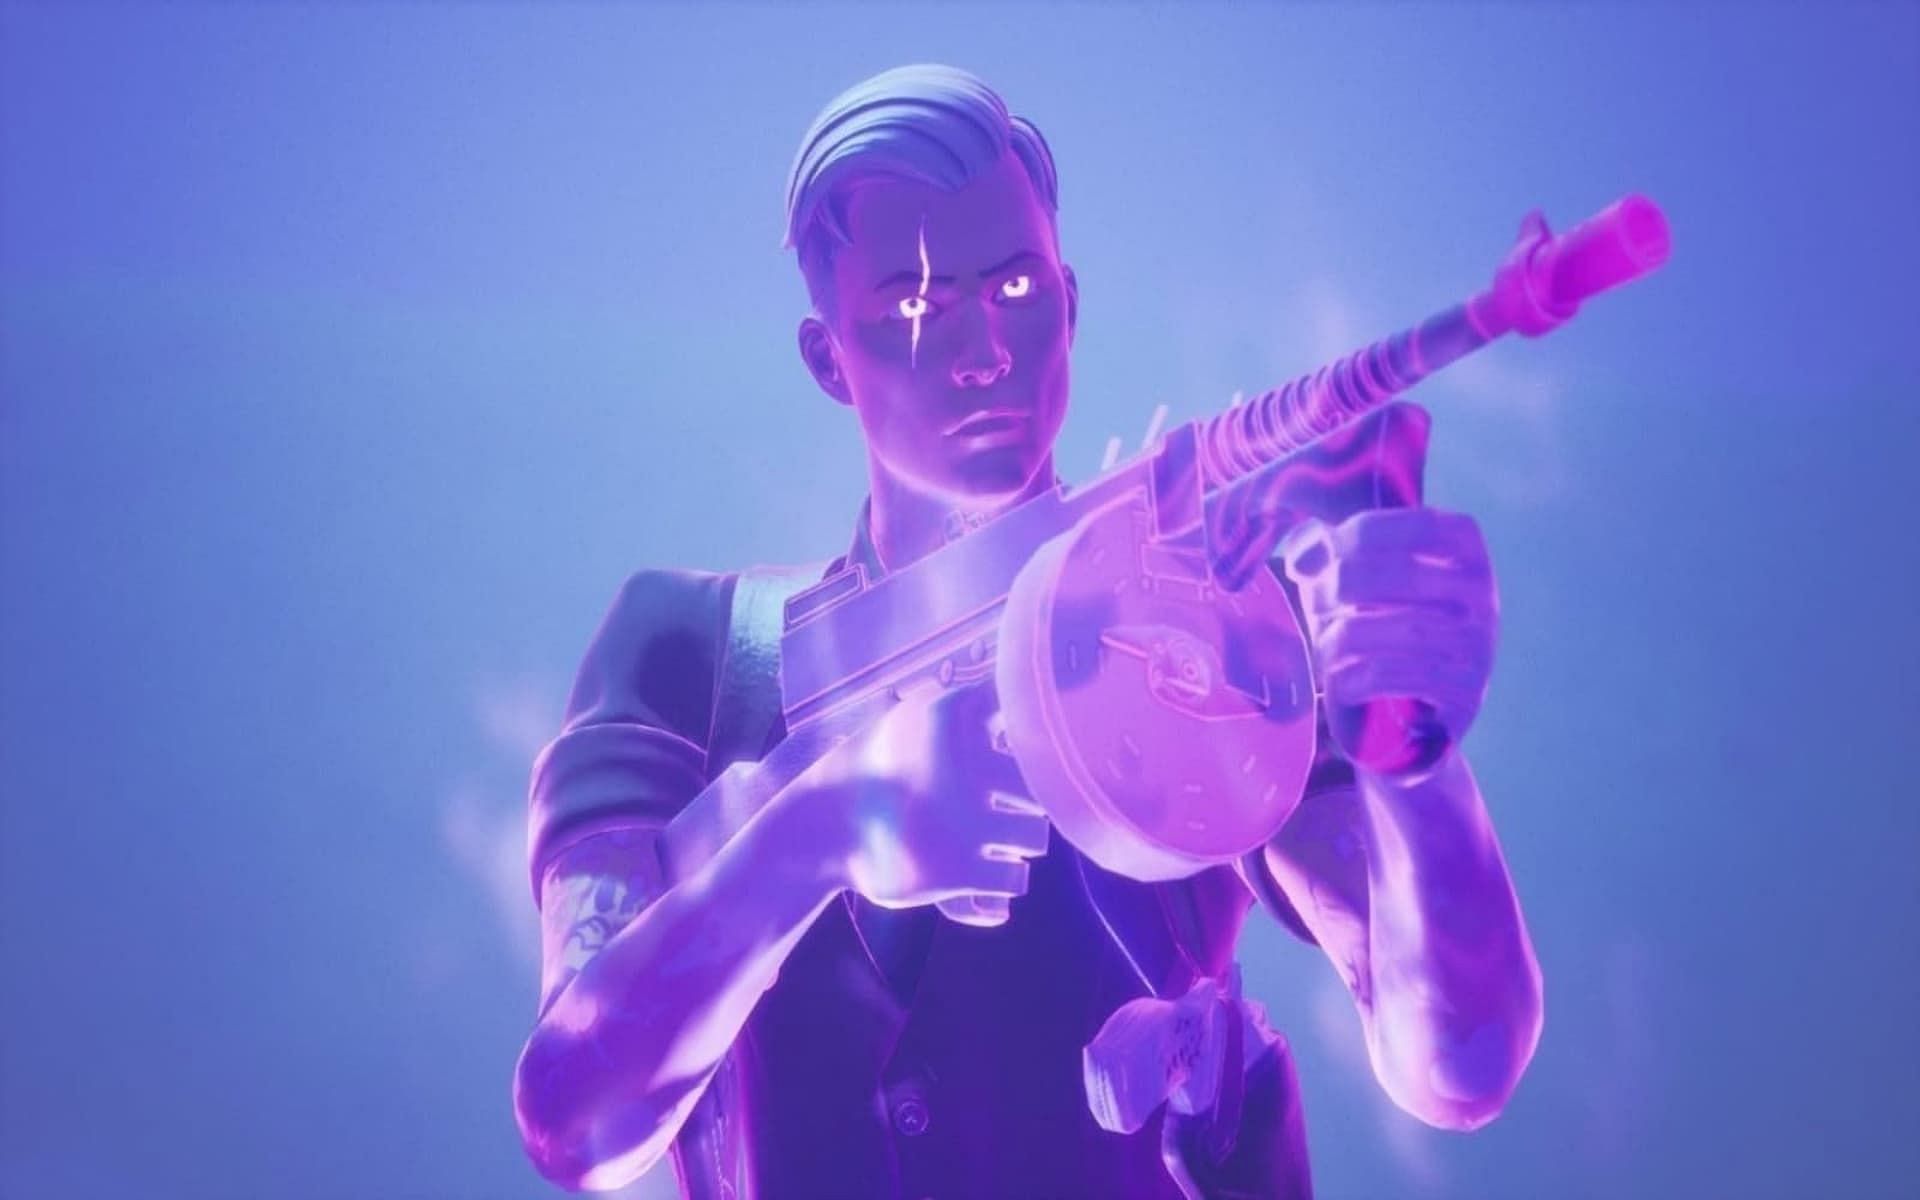 Midas has several forms he could return to Fortnite in (Image via Epic Games)